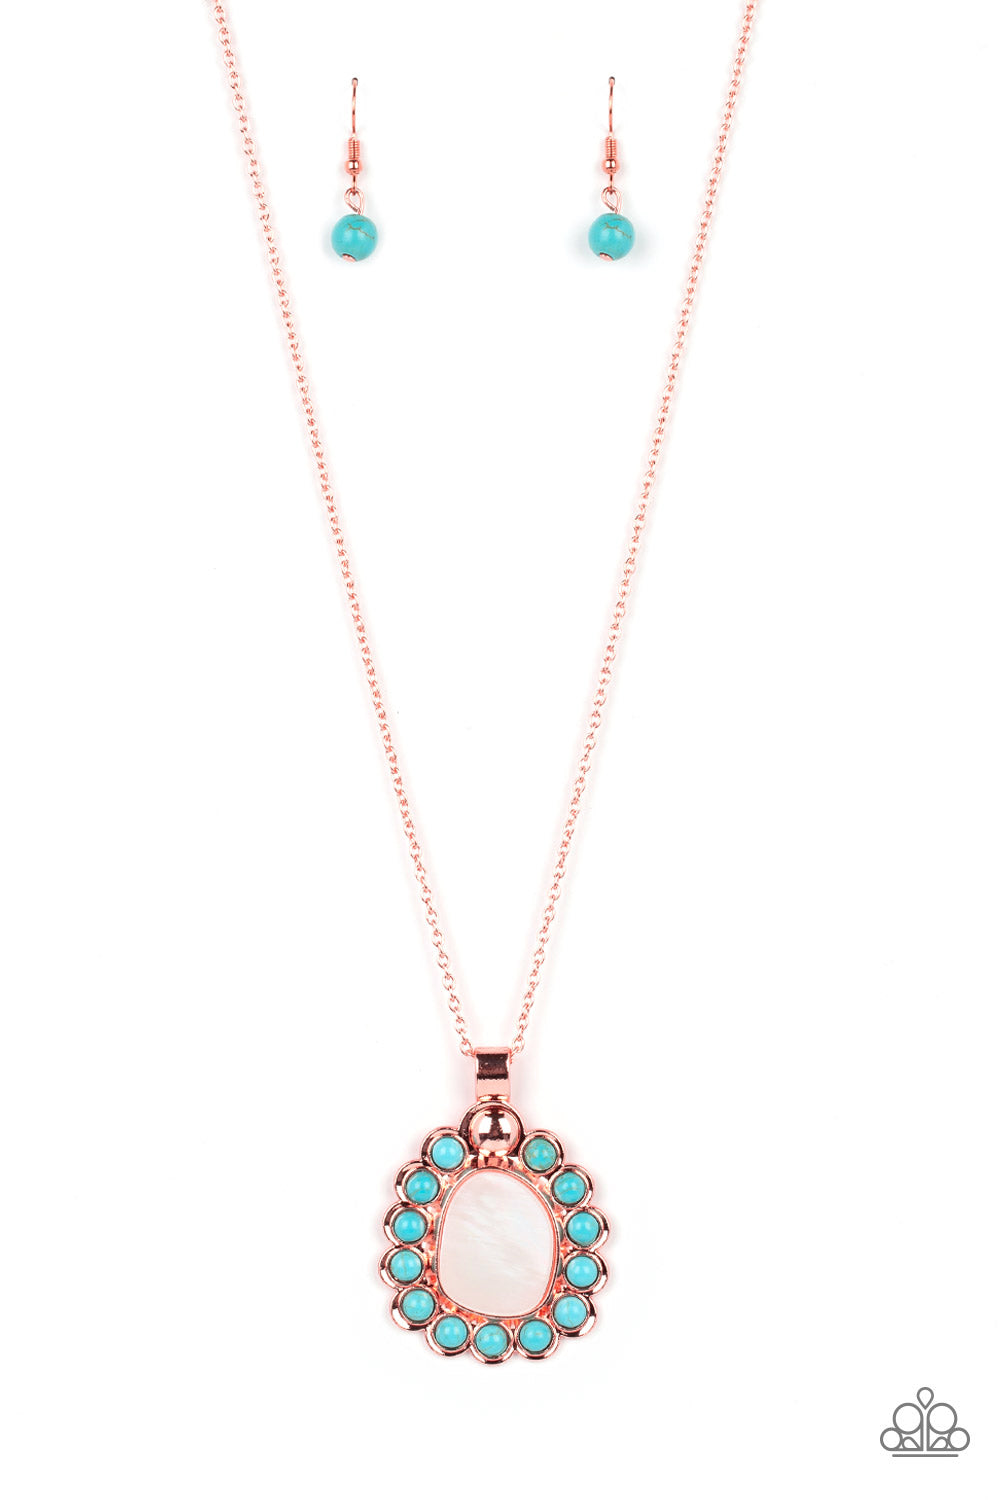 Sahara Sea Copper Necklace - Paparazzi Accessories  Dangling from a shiny copper chain, an asymmetrical white shell with an opal finish is encircled by a turquoise stone-studded frame, creating a seasonal Southwestern pattern. As the stone elements in this piece are natural, some color variation is normal. Features an adjustable clasp closure.  Sold as one individual necklace. Includes one pair of matching earrings.